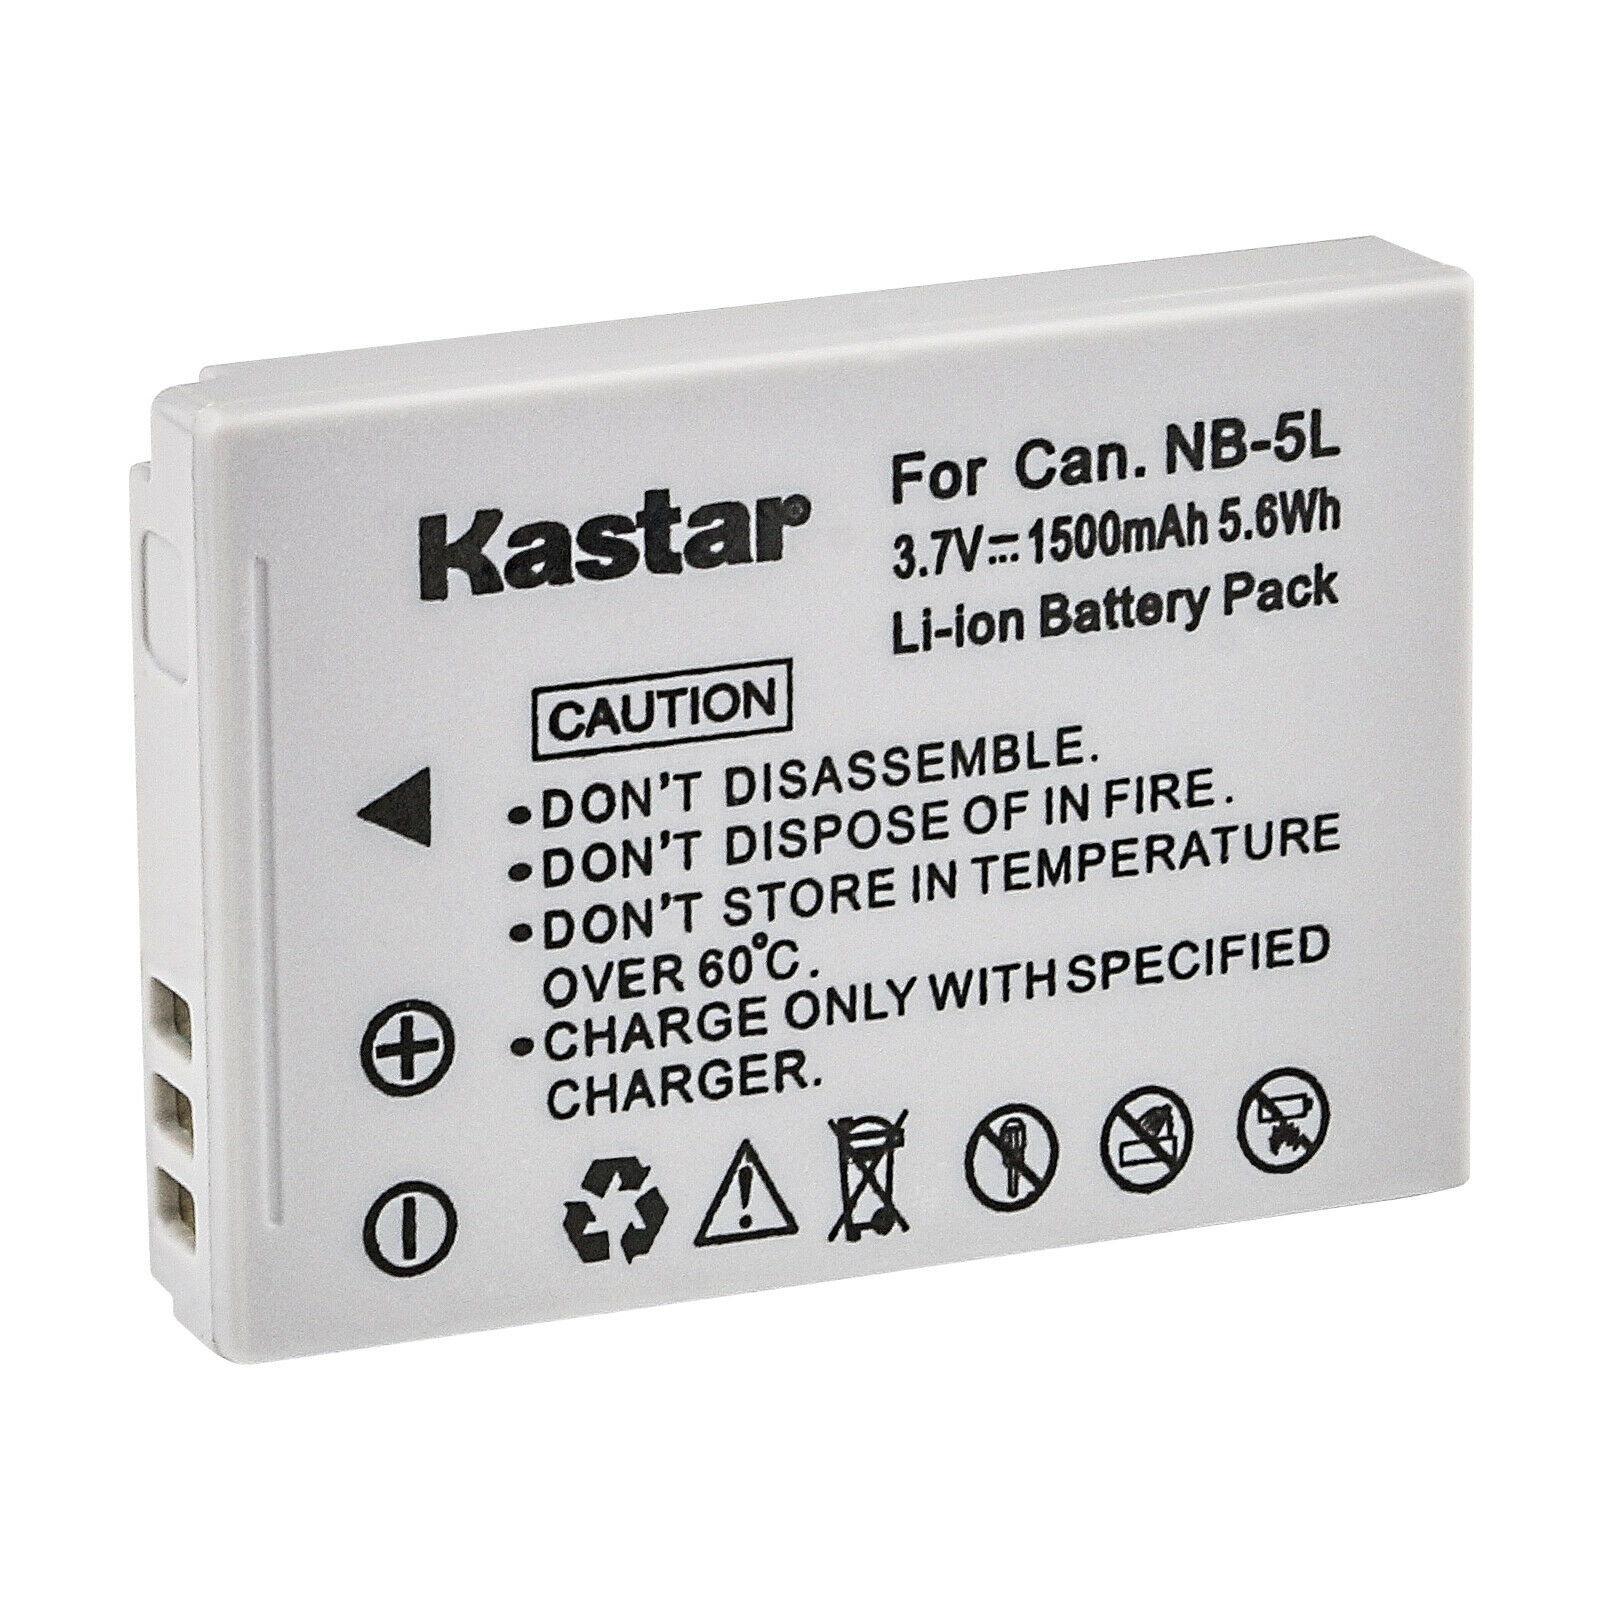 Kastar 3-Pack Battery and AC Wall Charger Replacement for Canon PowerShot SD850 IS, PowerShot SD870 IS, PowerShot SD880 IS, PowerShot SD890 IS, PowerShot SD900 IS, PowerShot SD950 IS Cameras - image 2 of 5